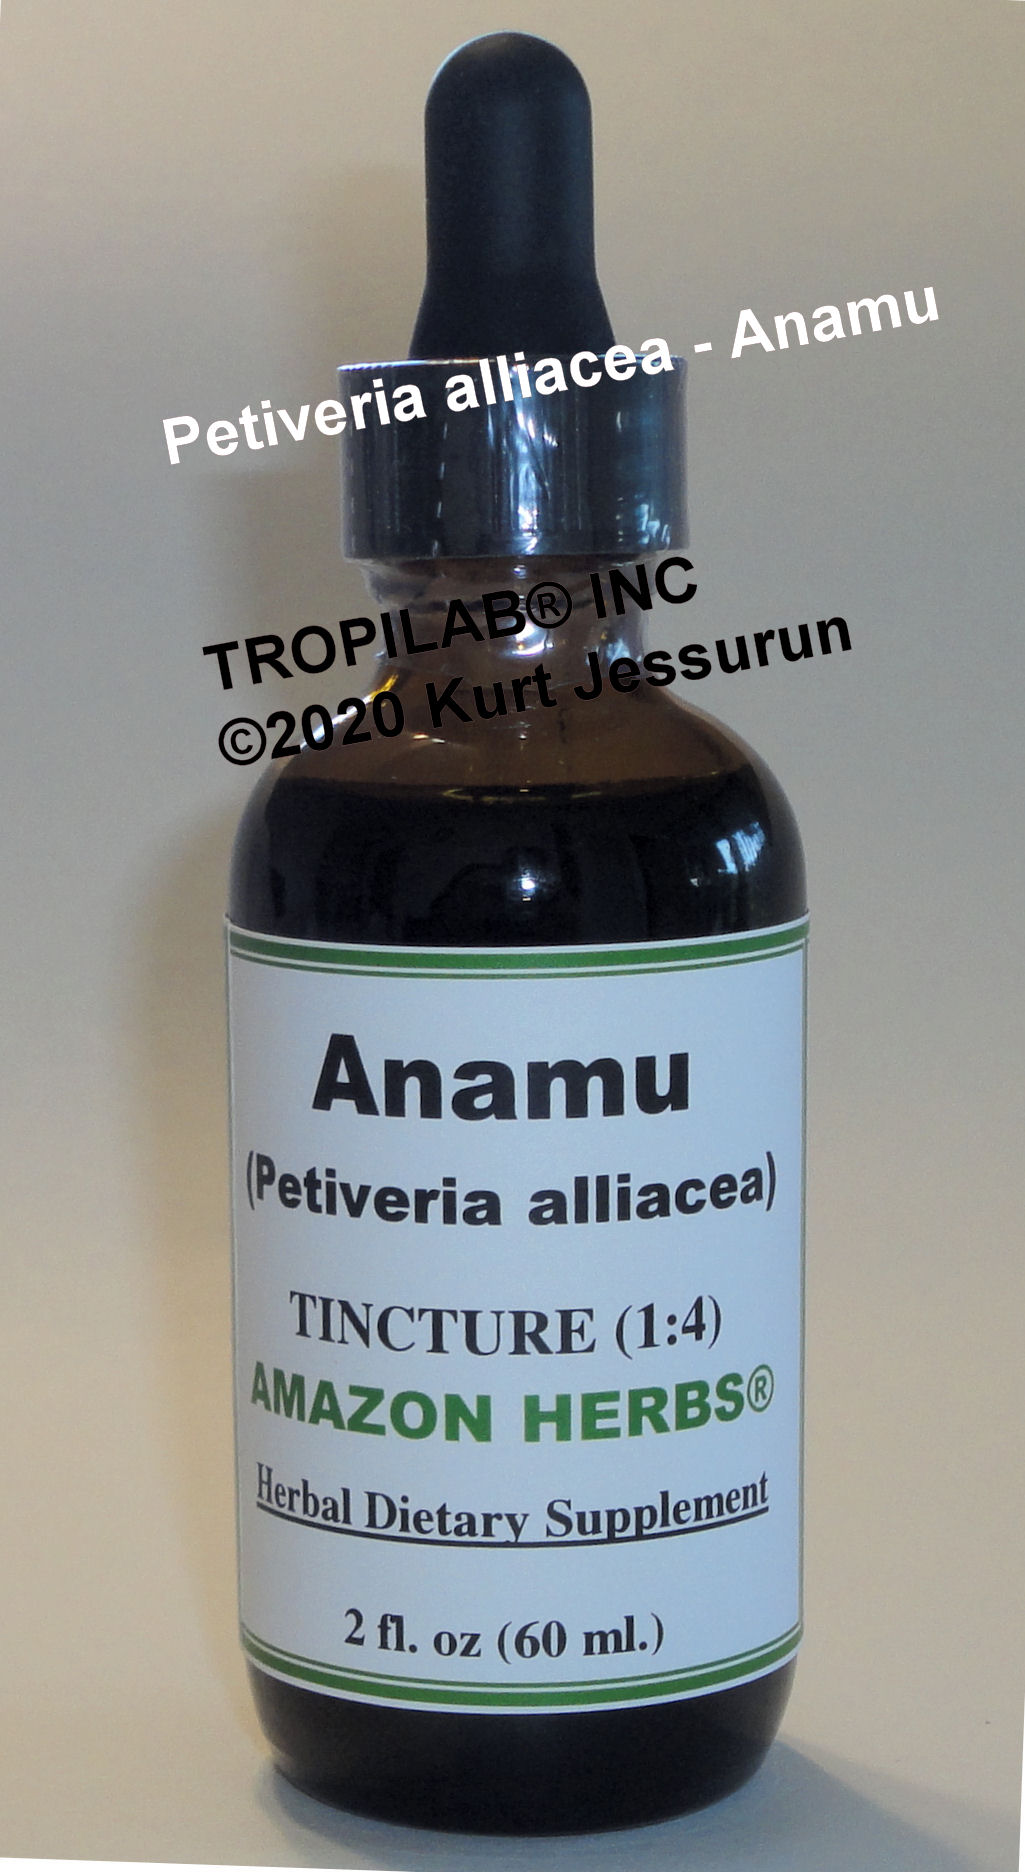 Petiveria Alliacea - Anamu tincture; Tropilab. Traditionally used for many medicinal applications, such as boosting immunity, 
fighting cancers, reducing inflammation, alleviate pain, antioxidant)